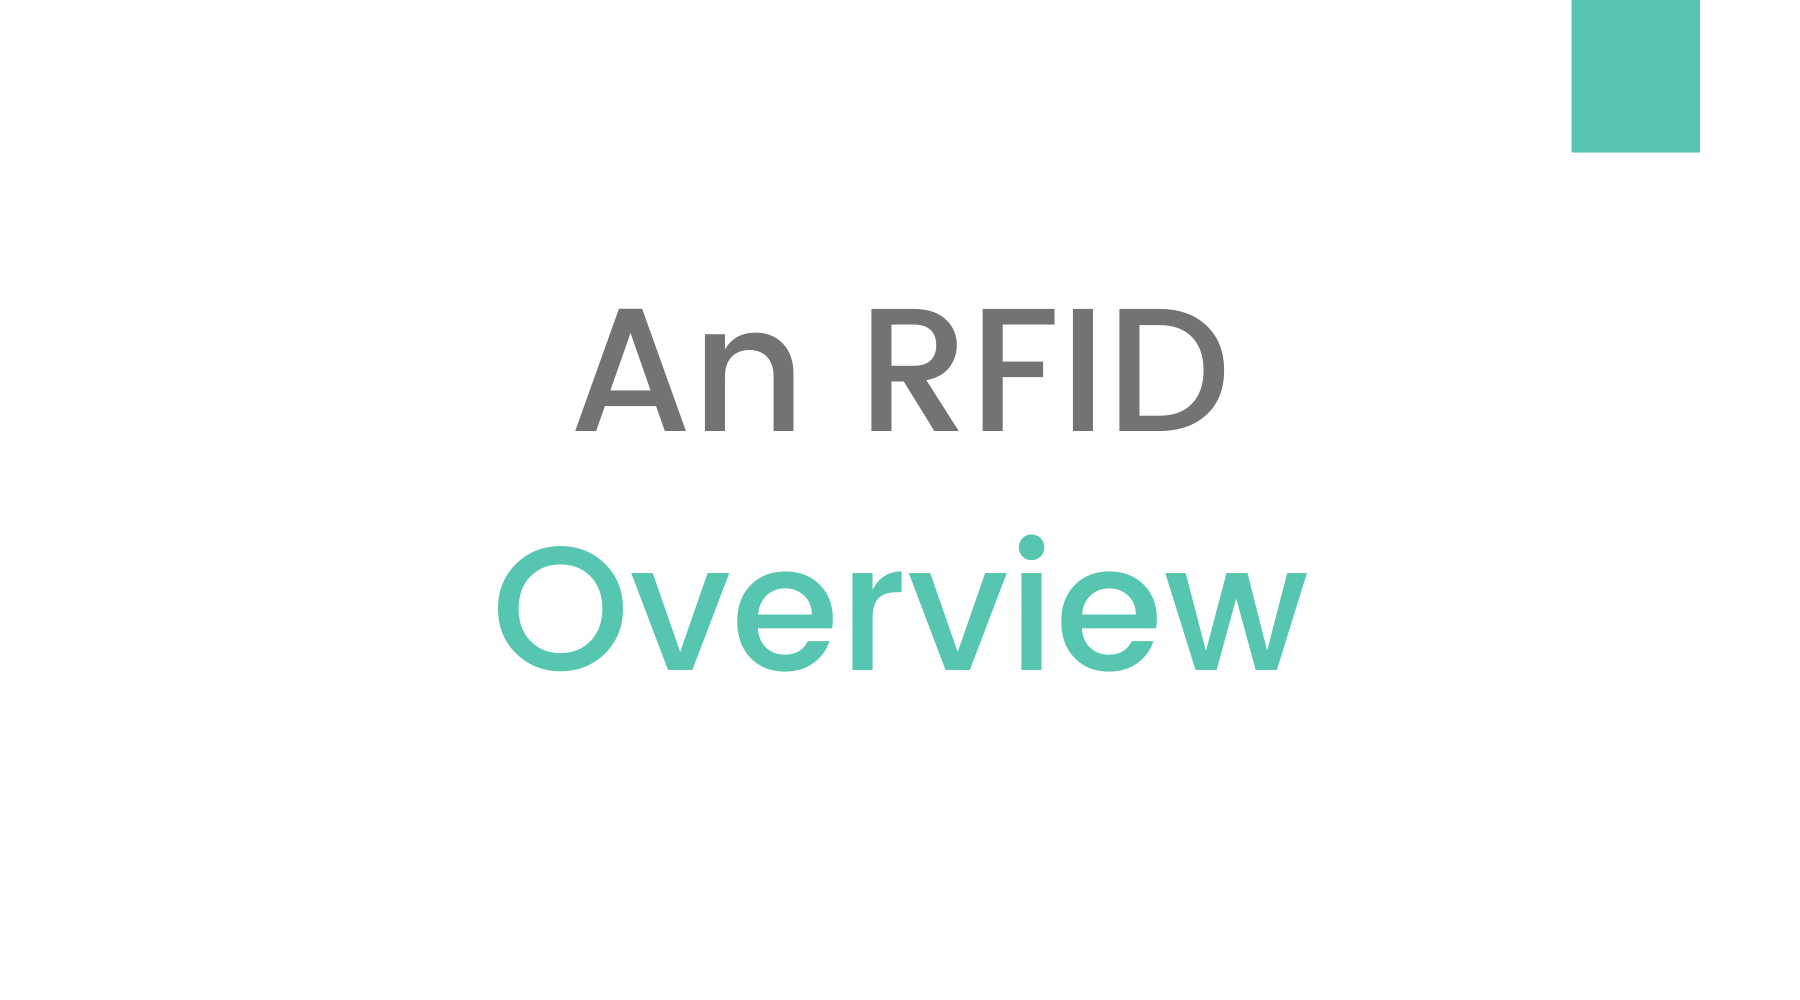 An RFID Overview